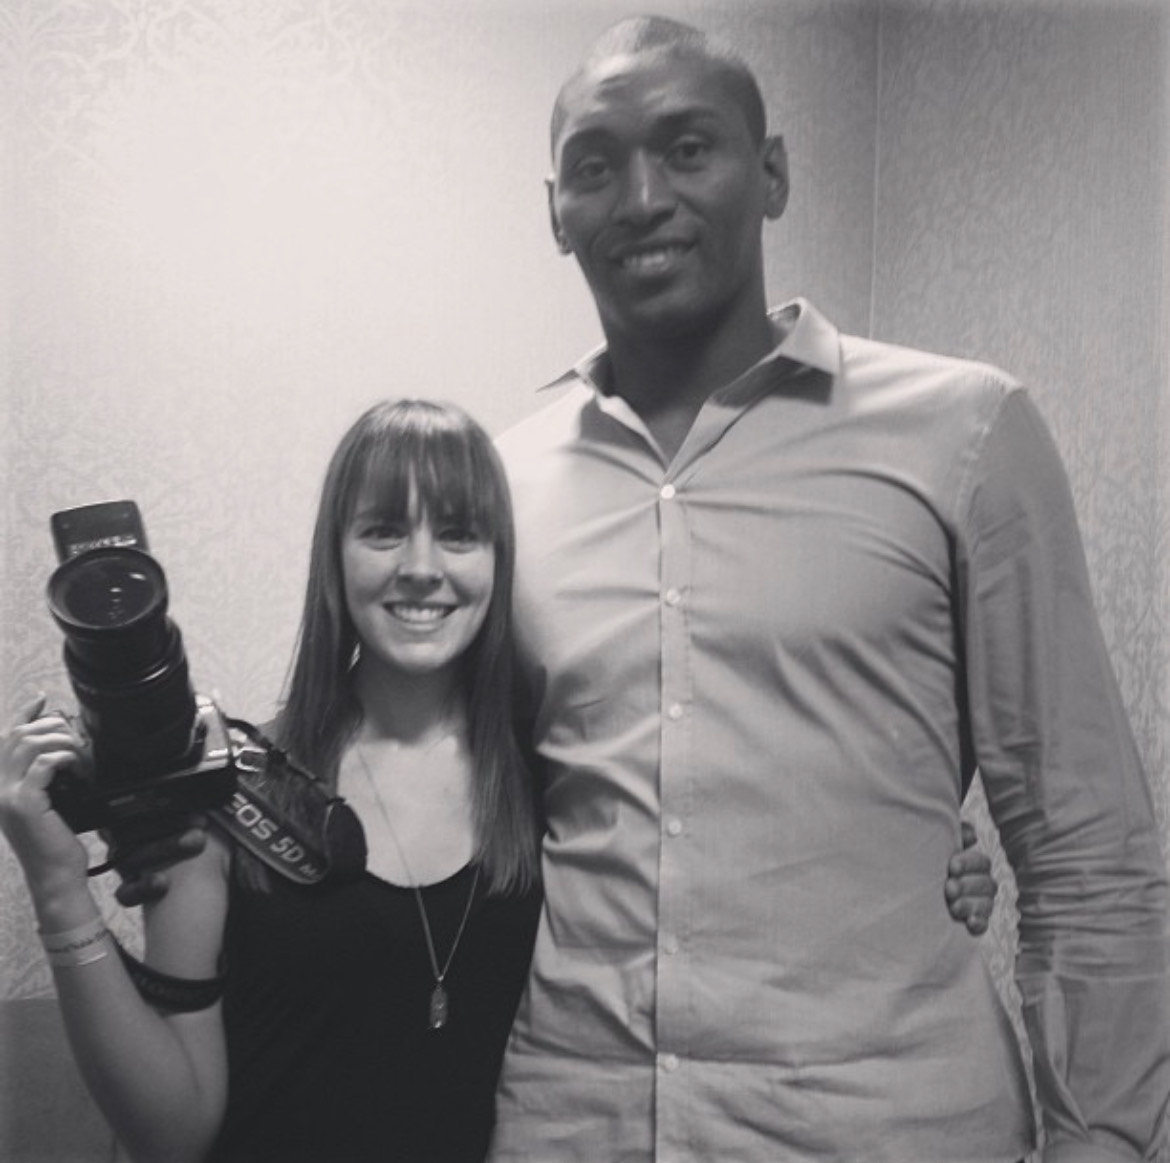 Image of Laura June Kirsch and NBA player Ben Simmons. Laura is a shorter white woman, wearing a black tank top and holding a large canon camera with flash. Ben is a tall black man wearing a light collared shirt. They're both looking forward and smiling.